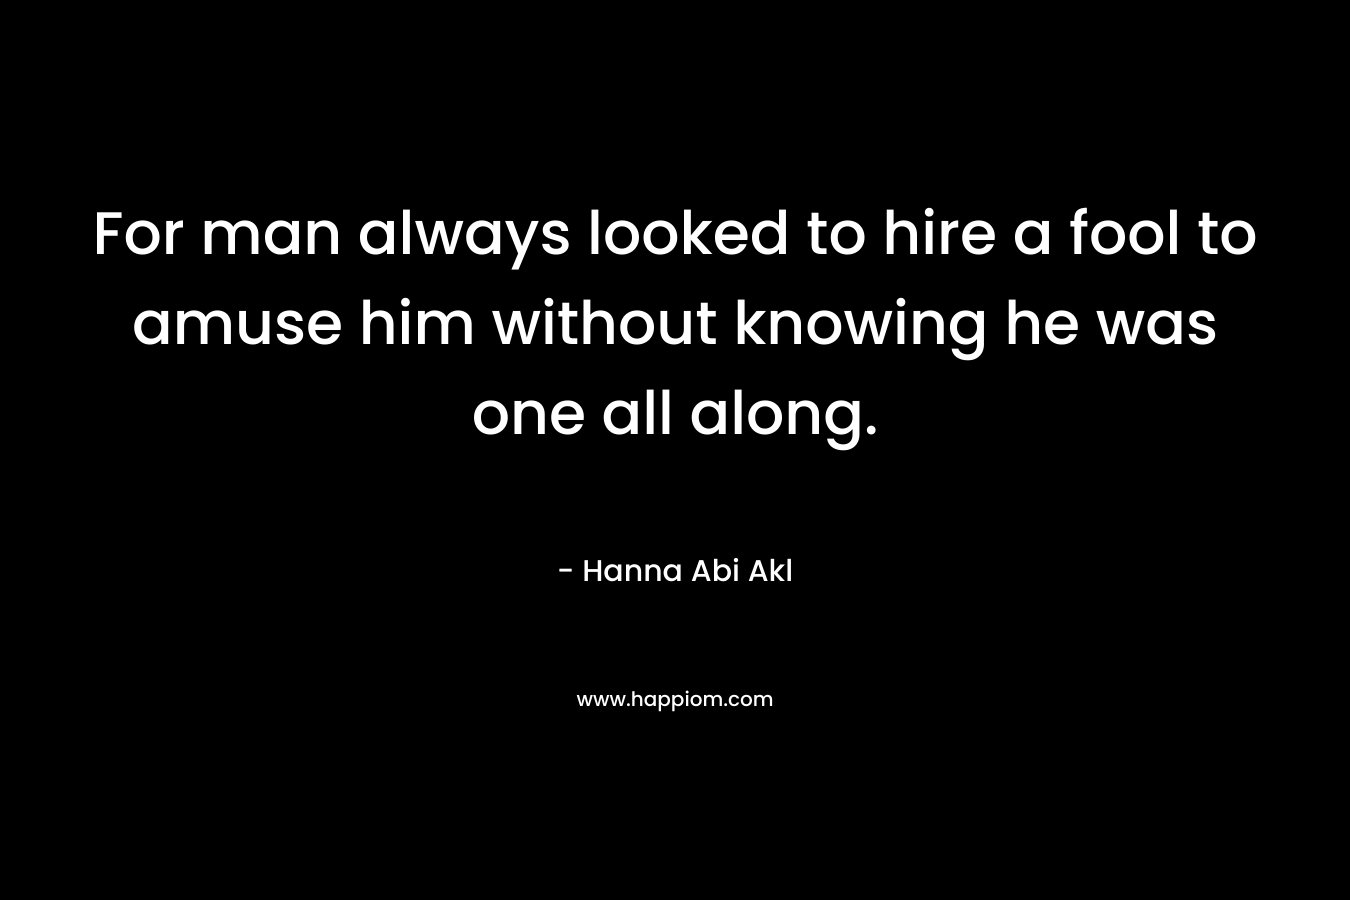 For man always looked to hire a fool to amuse him without knowing he was one all along. – Hanna Abi Akl